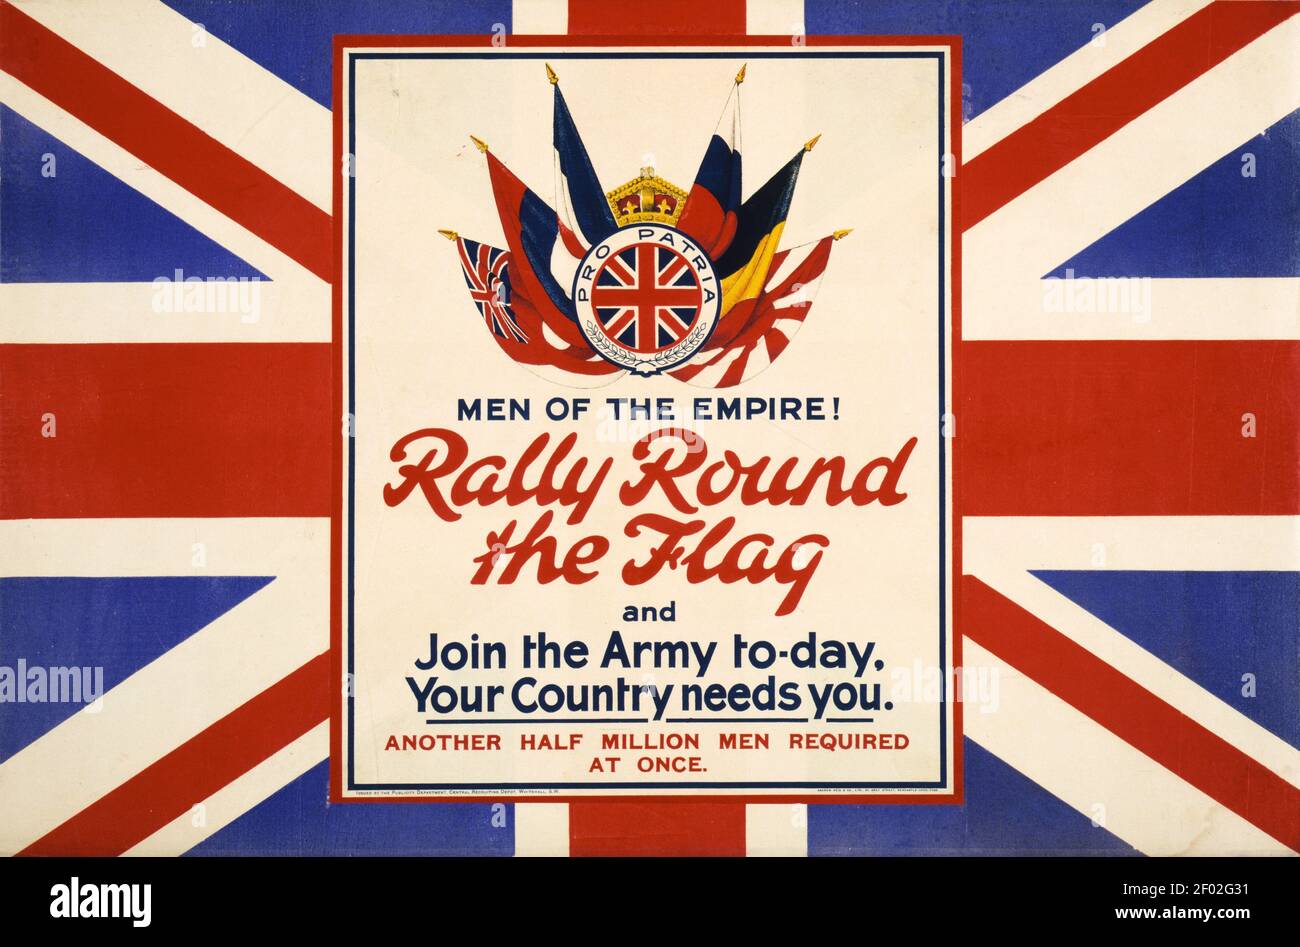 Men of the Empire! Rally Round the Flag. Join The Army to-day. Your country needs you. Union Jack, The British flag illustrates this ad / poster. Stock Photo